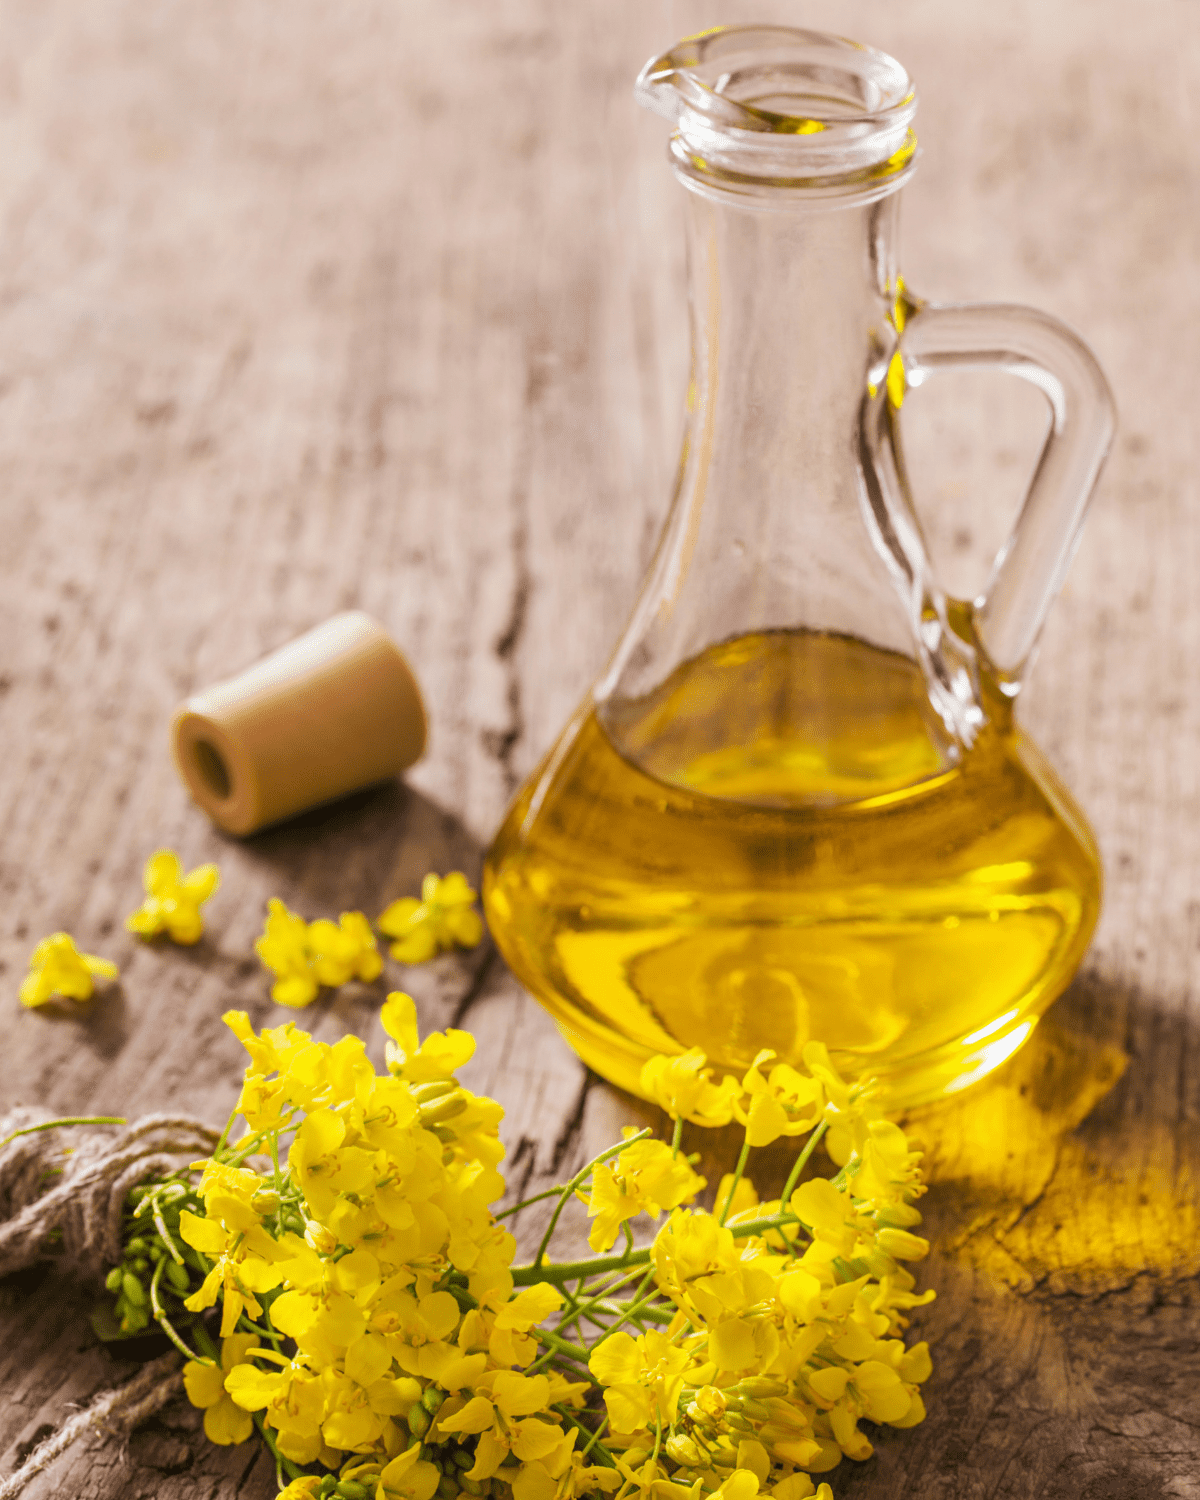 Glass bottle of canola oil with a cork and yellow flowers next to the bottle.